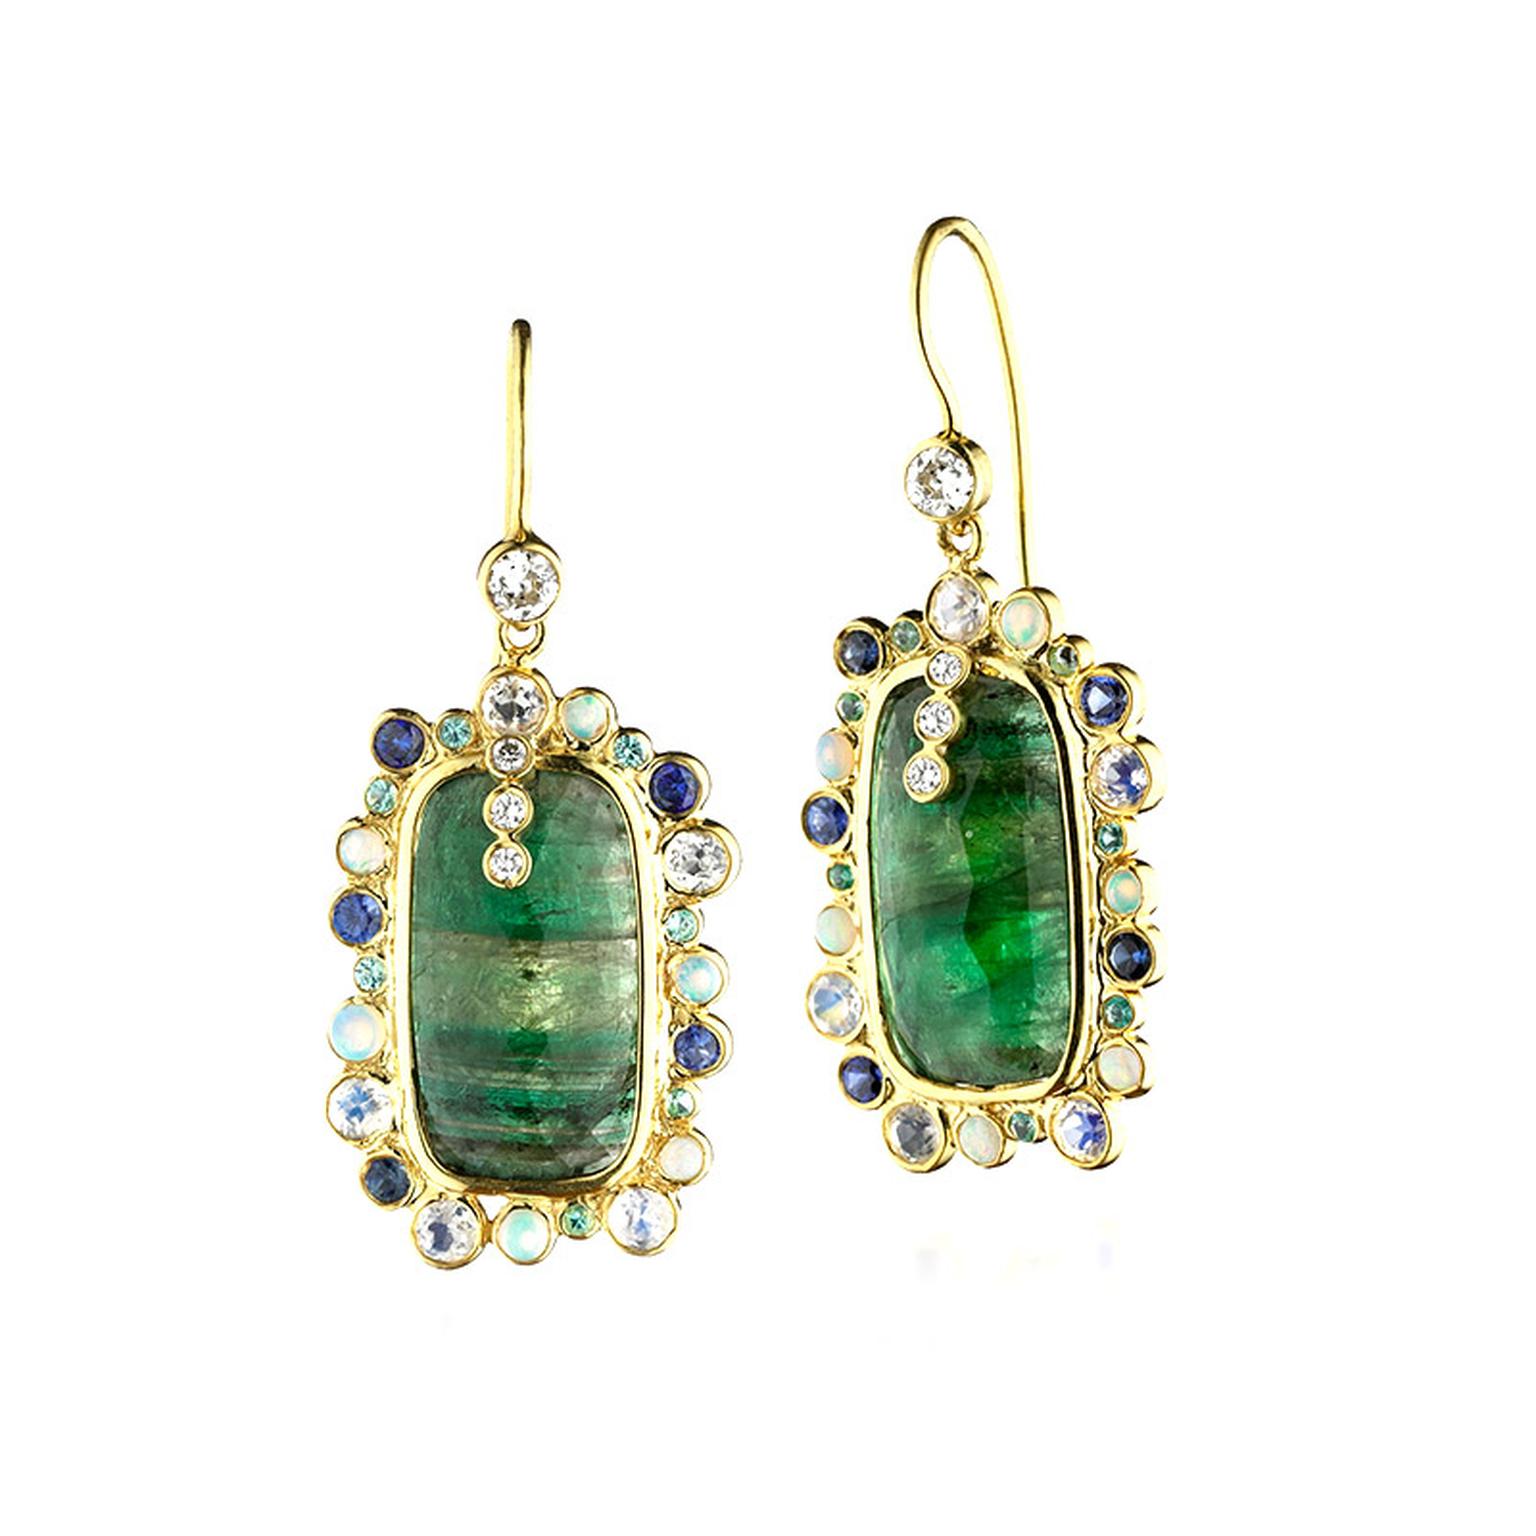 Enchanting emeralds: the birthstone of May babies